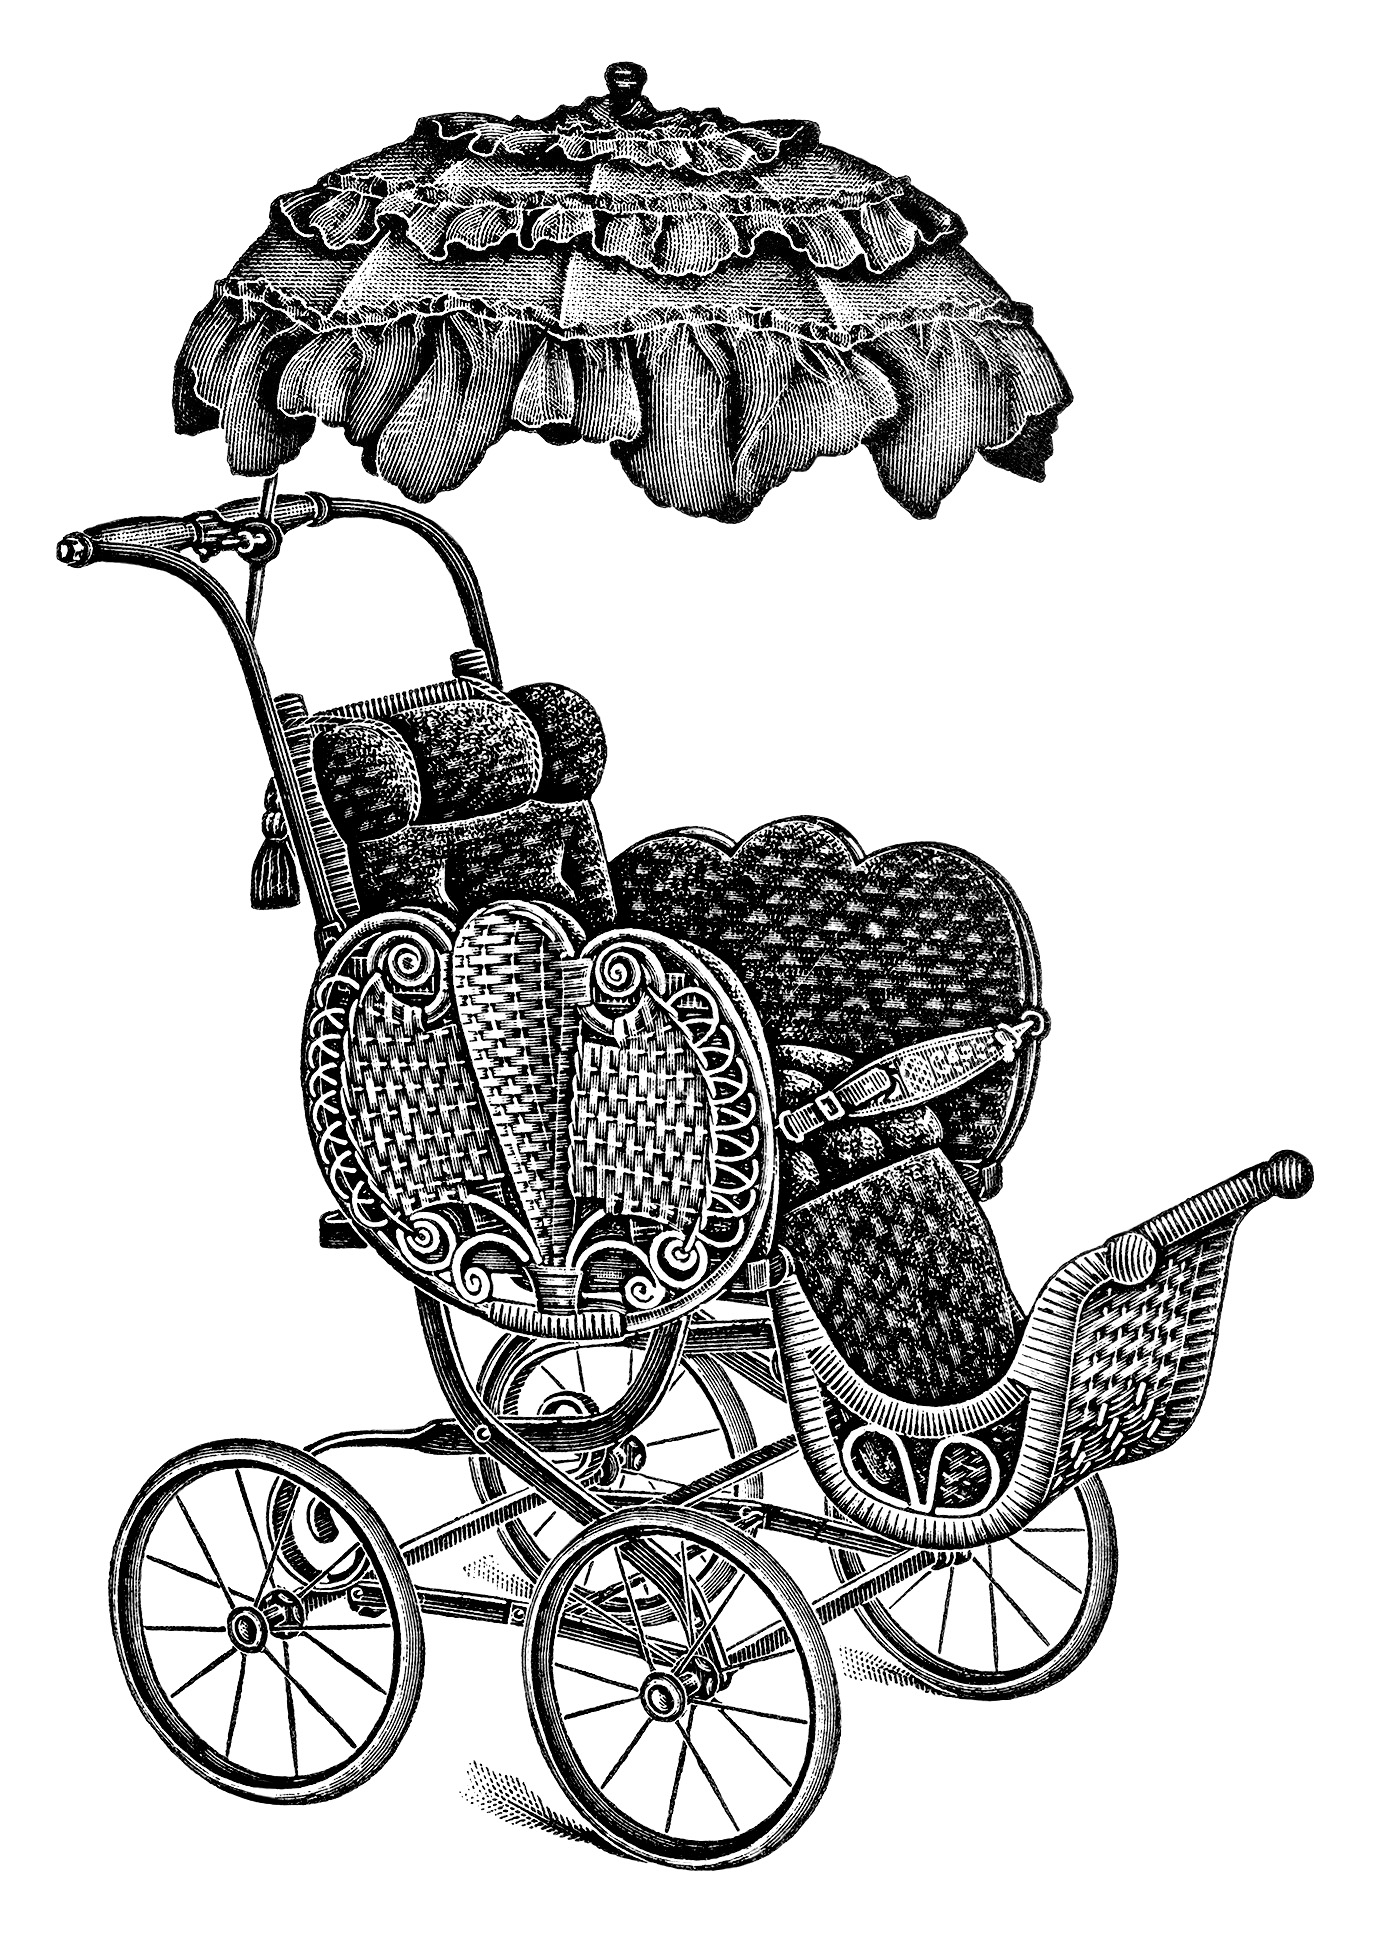 old fashioned style strollers